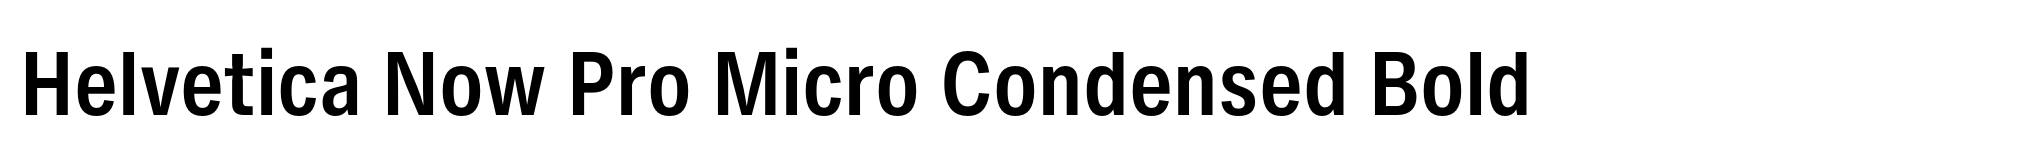 Helvetica Now Pro Micro Condensed Bold image